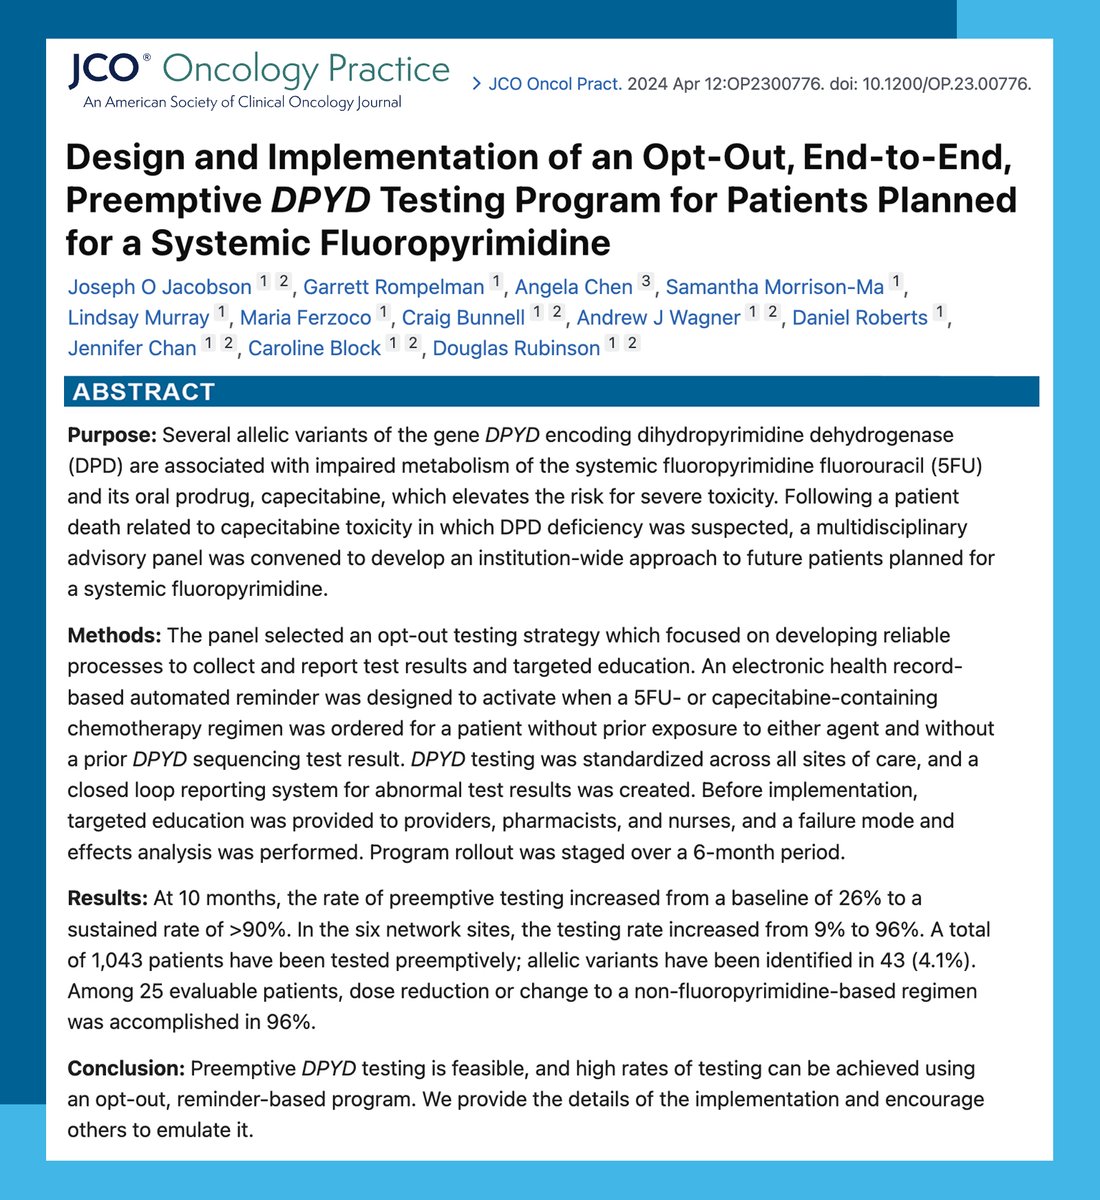 Learn about the design and implementation of an opt-out, end-to-end, preemptive DPYD testing program for patients planned for a systemic fluoropyrimidine in this recent @JCOOP_ASCO publication. @bunnell_craig #CarolineBlock @Labrat3 👉pubmed.ncbi.nlm.nih.gov/38608224/